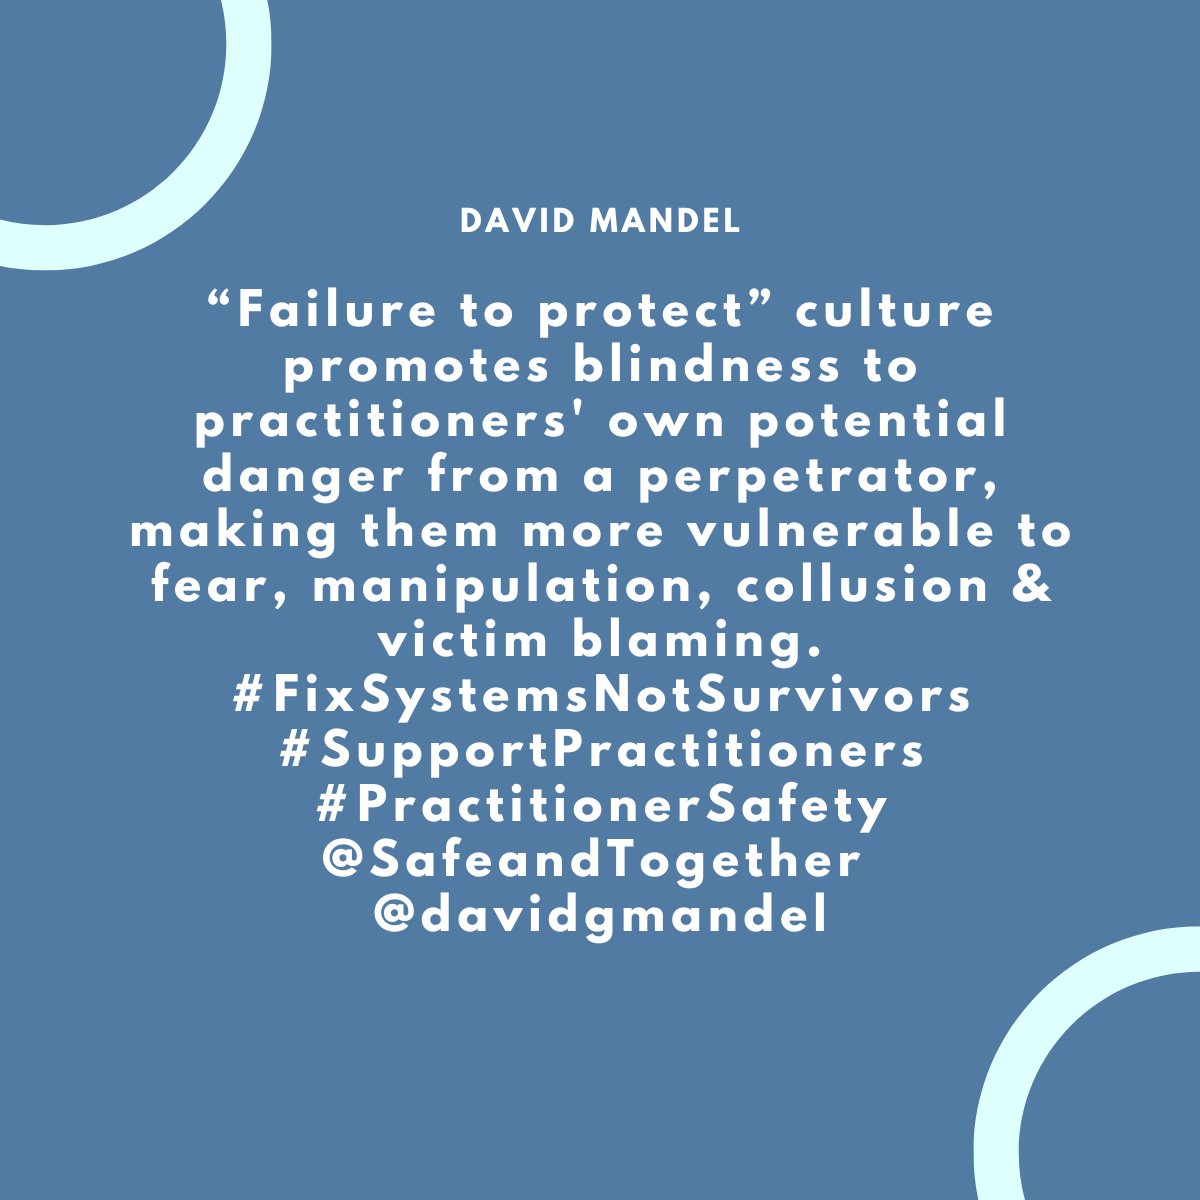 “Failure to protect” culture promotes blindness to practitioners' own potential danger from a perpetrator, making them more vulnerable to fear, manipulation, collusion & victim blaming. #FixSystemsNotSurvivors #SupportPractitioners #PractitionerSafety @SafeandTogether